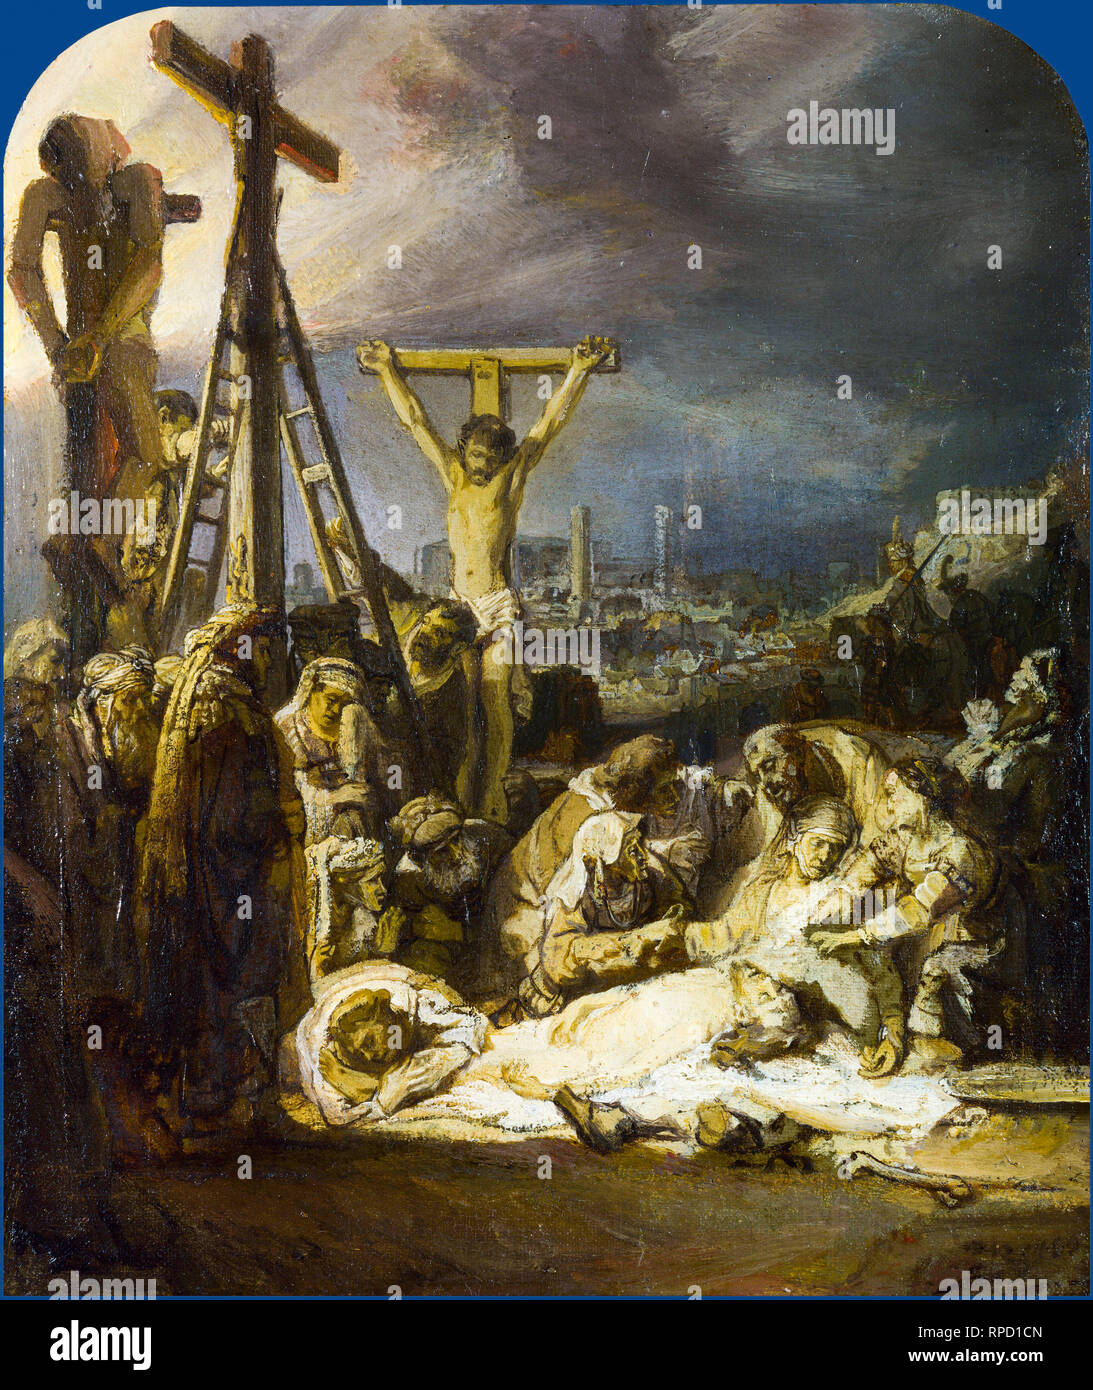 The Lamentation over the Dead Christ, Rembrandt, c. 1635, painting Stock Photo